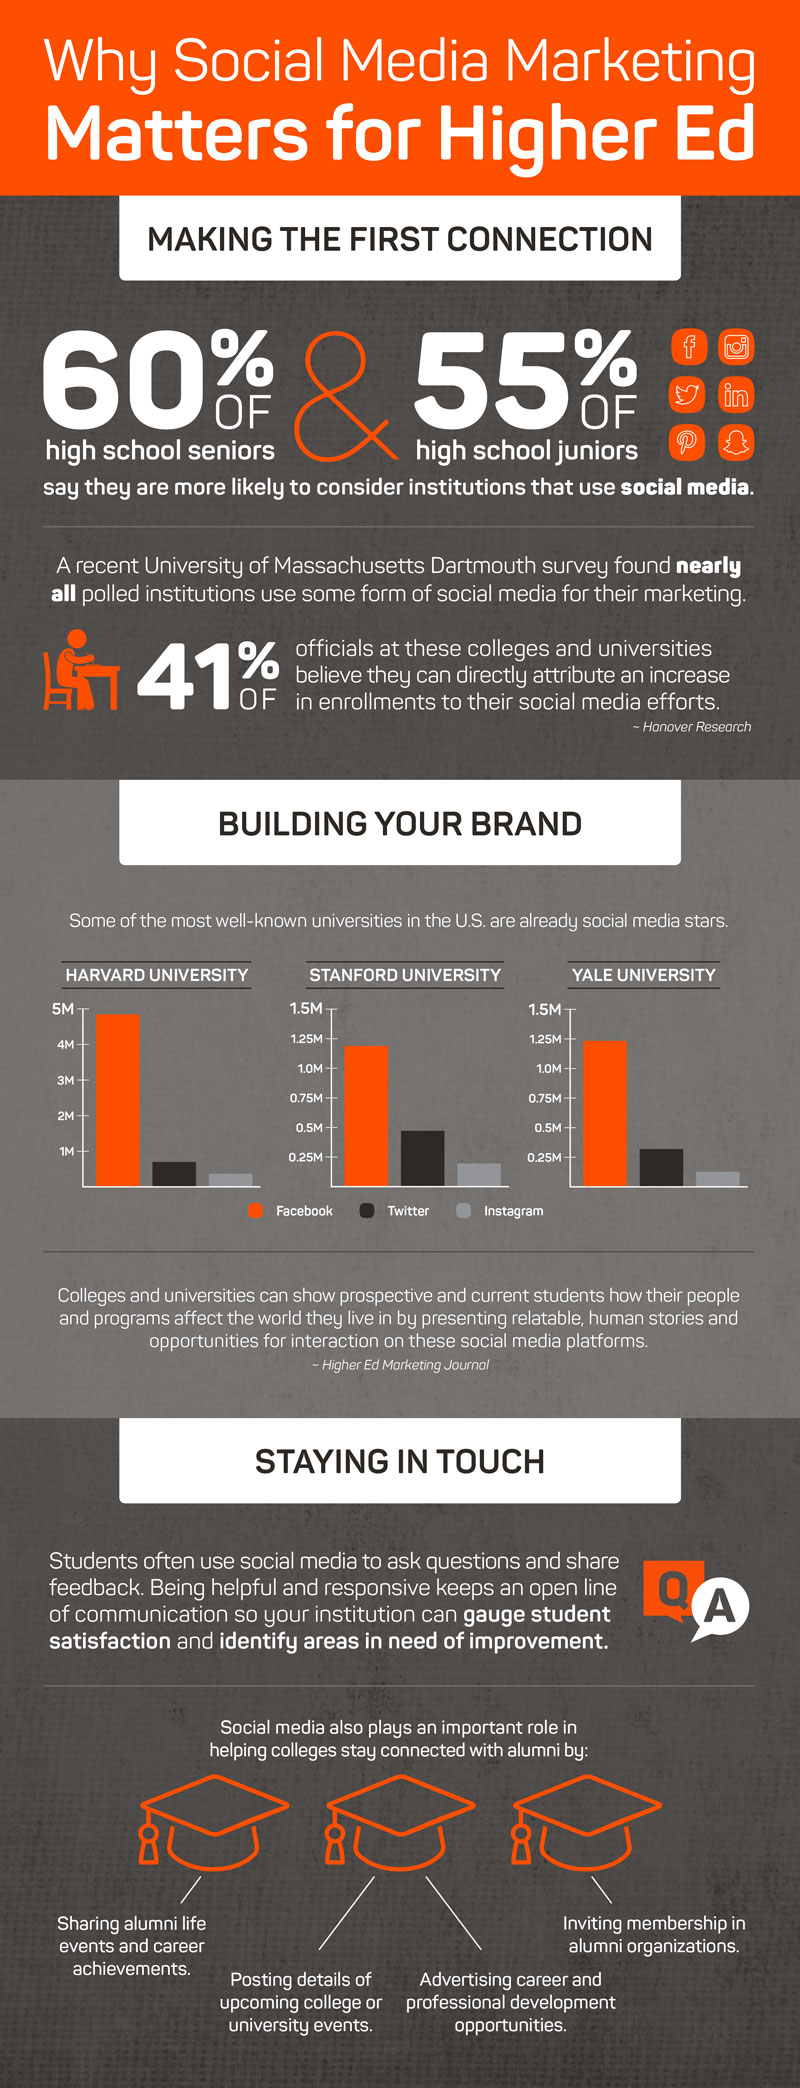 Why Social Media Marketing Matters for Higher Ed infographic